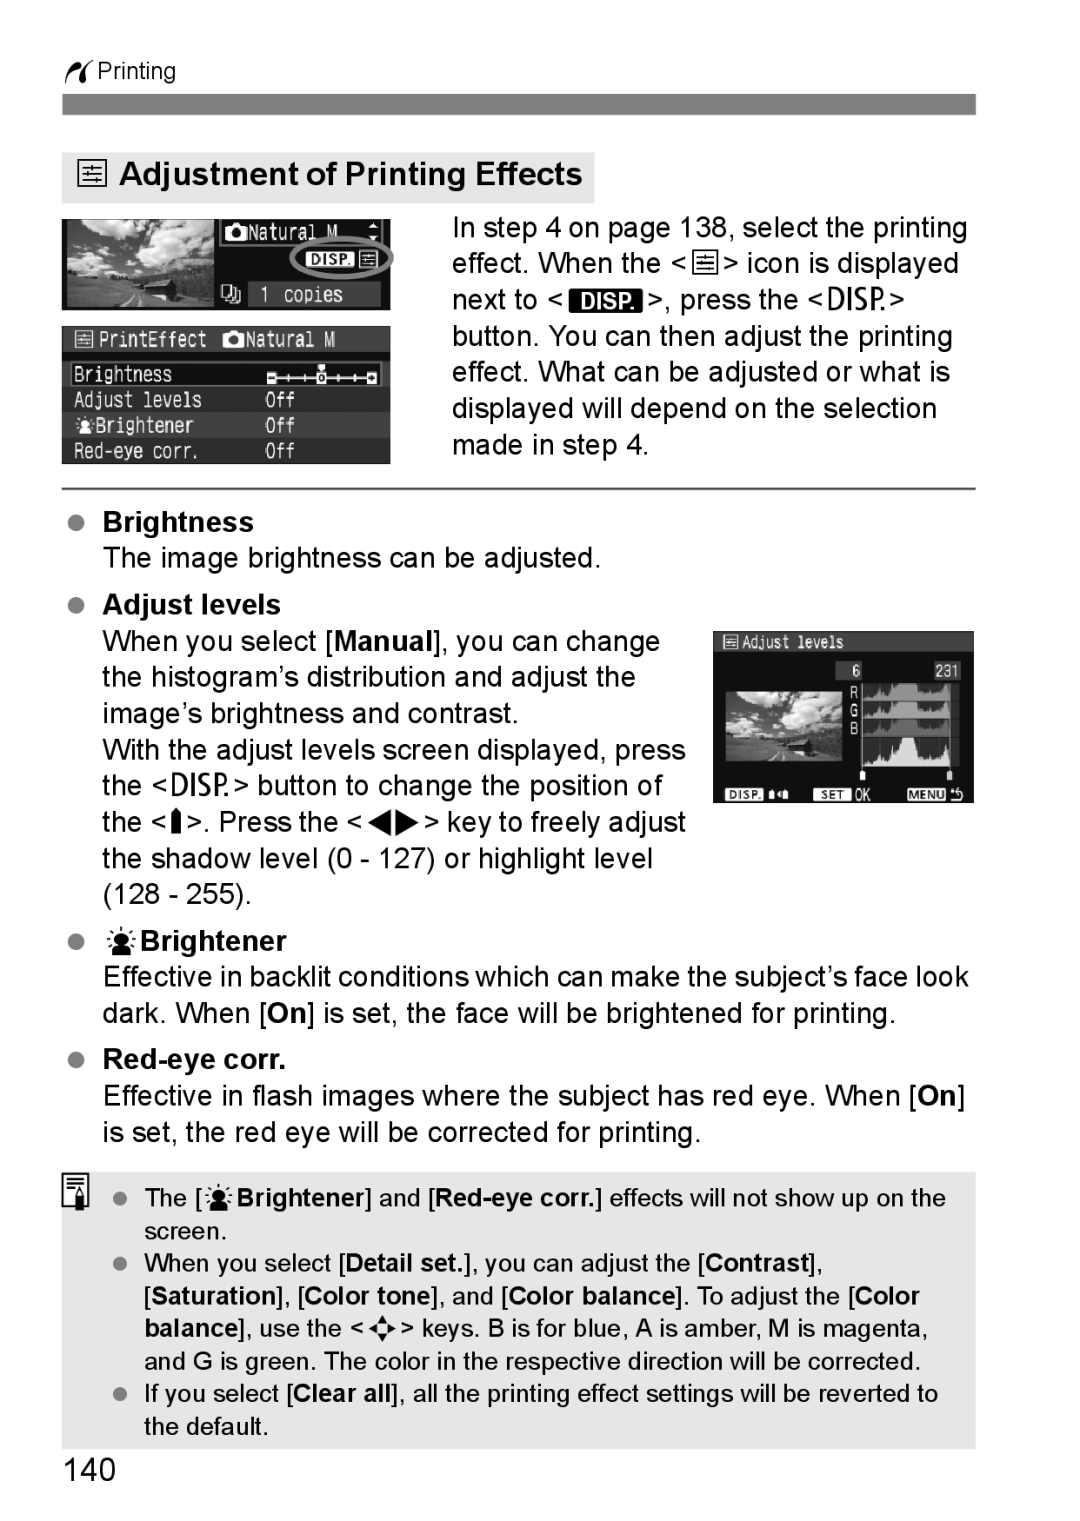 Canon EOS 450D instruction manual EAdjustment of Printing Effects, 140 